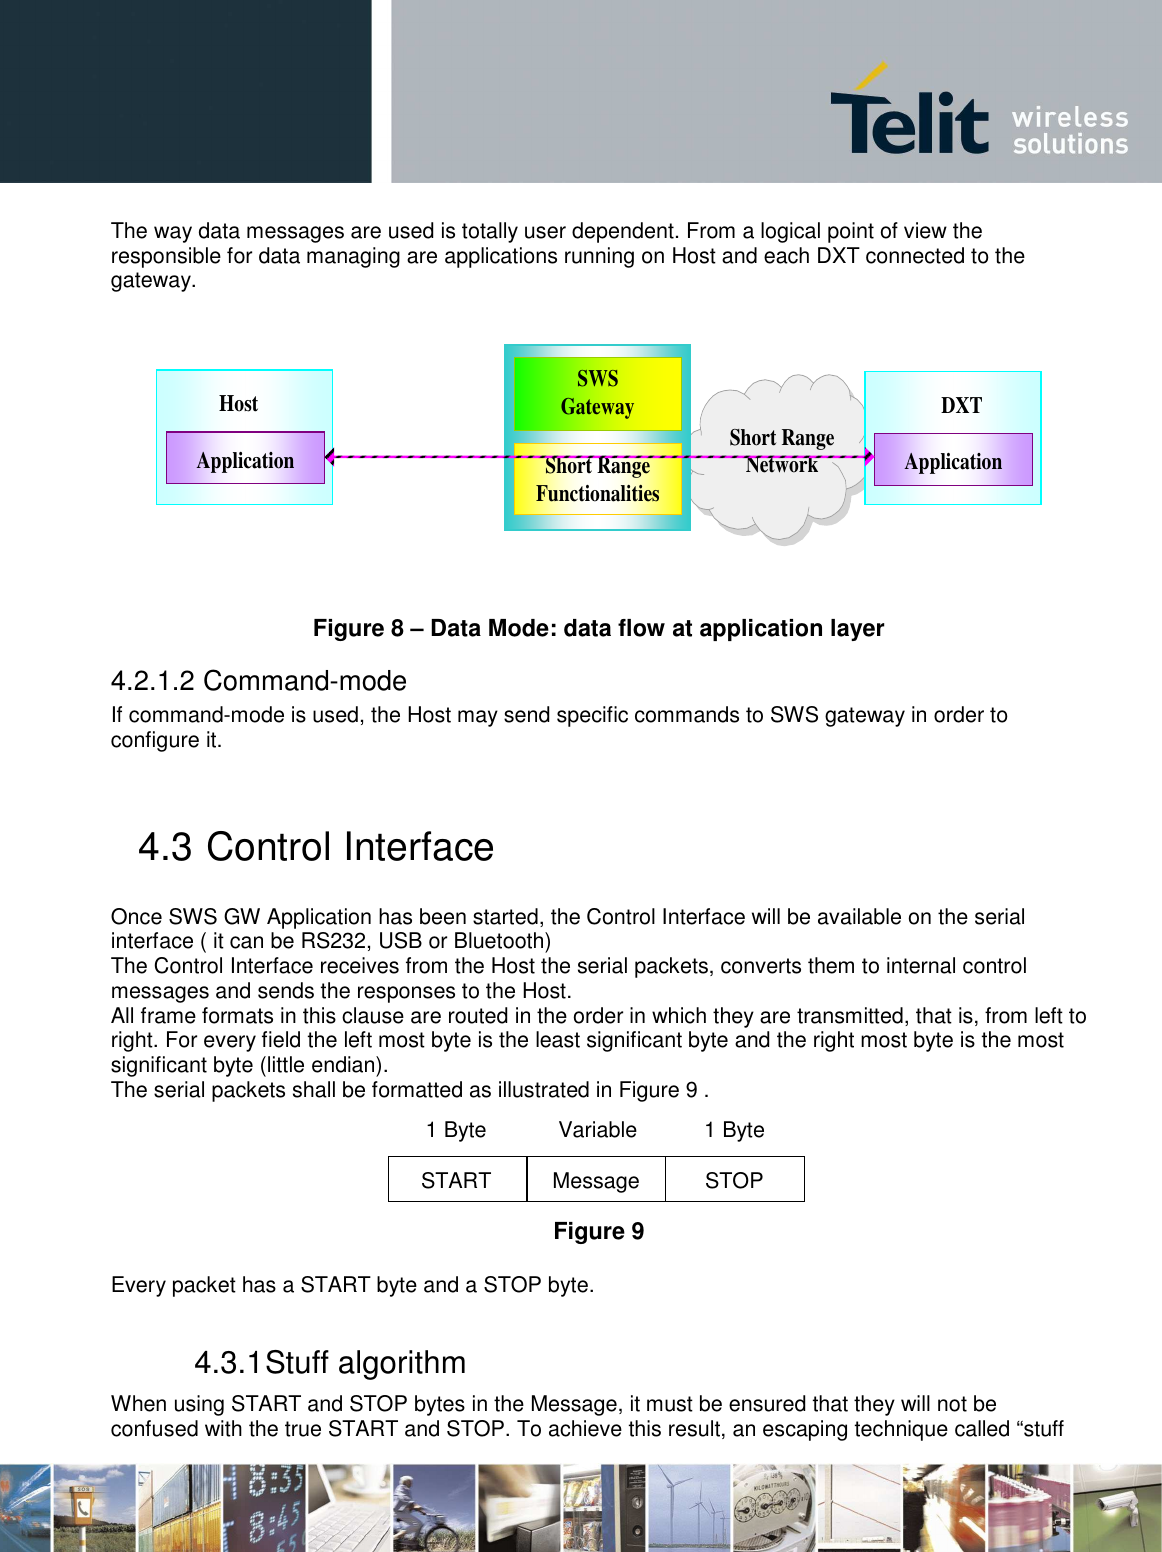       The way data messages are used is totally user dependent. From a logical point of view the responsible for data managing are applications running on Host and each DXT connected to the gateway.               Figure 8 – Data Mode: data flow at application layer 4.2.1.2  Command-mode If command-mode is used, the Host may send specific commands to SWS gateway in order to configure it.  4.3  Control Interface Once SWS GW Application has been started, the Control Interface will be available on the serial interface ( it can be RS232, USB or Bluetooth)  The Control Interface receives from the Host the serial packets, converts them to internal control messages and sends the responses to the Host.  All frame formats in this clause are routed in the order in which they are transmitted, that is, from left to right. For every field the left most byte is the least significant byte and the right most byte is the most significant byte (little endian). The serial packets shall be formatted as illustrated in Figure 9 .    Figure 9   Every packet has a START byte and a STOP byte. 4.3.1 Stuff algorithm When using START and STOP bytes in the Message, it must be ensured that they will not be confused with the true START and STOP. To achieve this result, an escaping technique called “stuff Message  STOP Variable  1 Byte 1 Byte START  Short Range Network SWS Gateway Short Range Functionalities Application DXT Application Host 